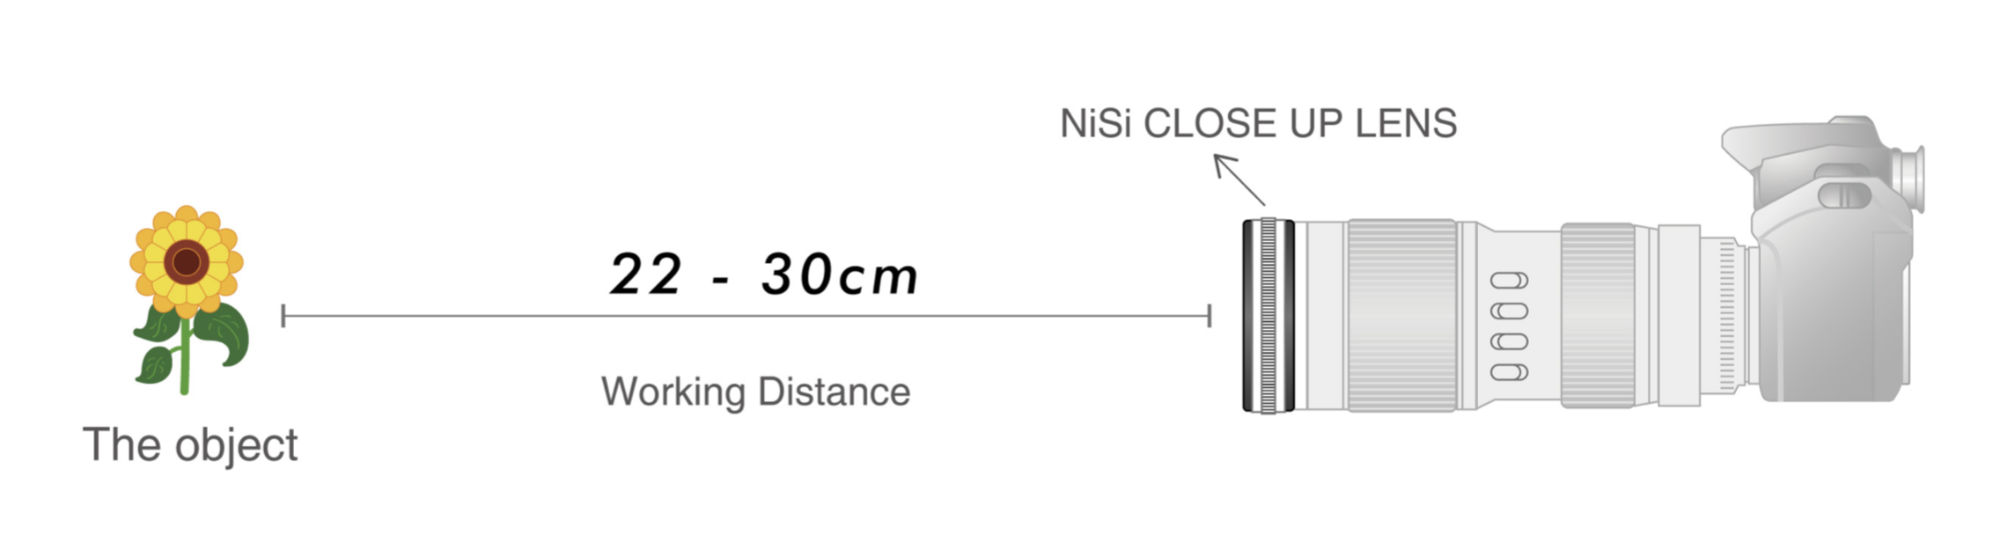 NiSi Close Up Lens Kit NC 77mm (with 67 and 72mm adaptors) - Working Distance